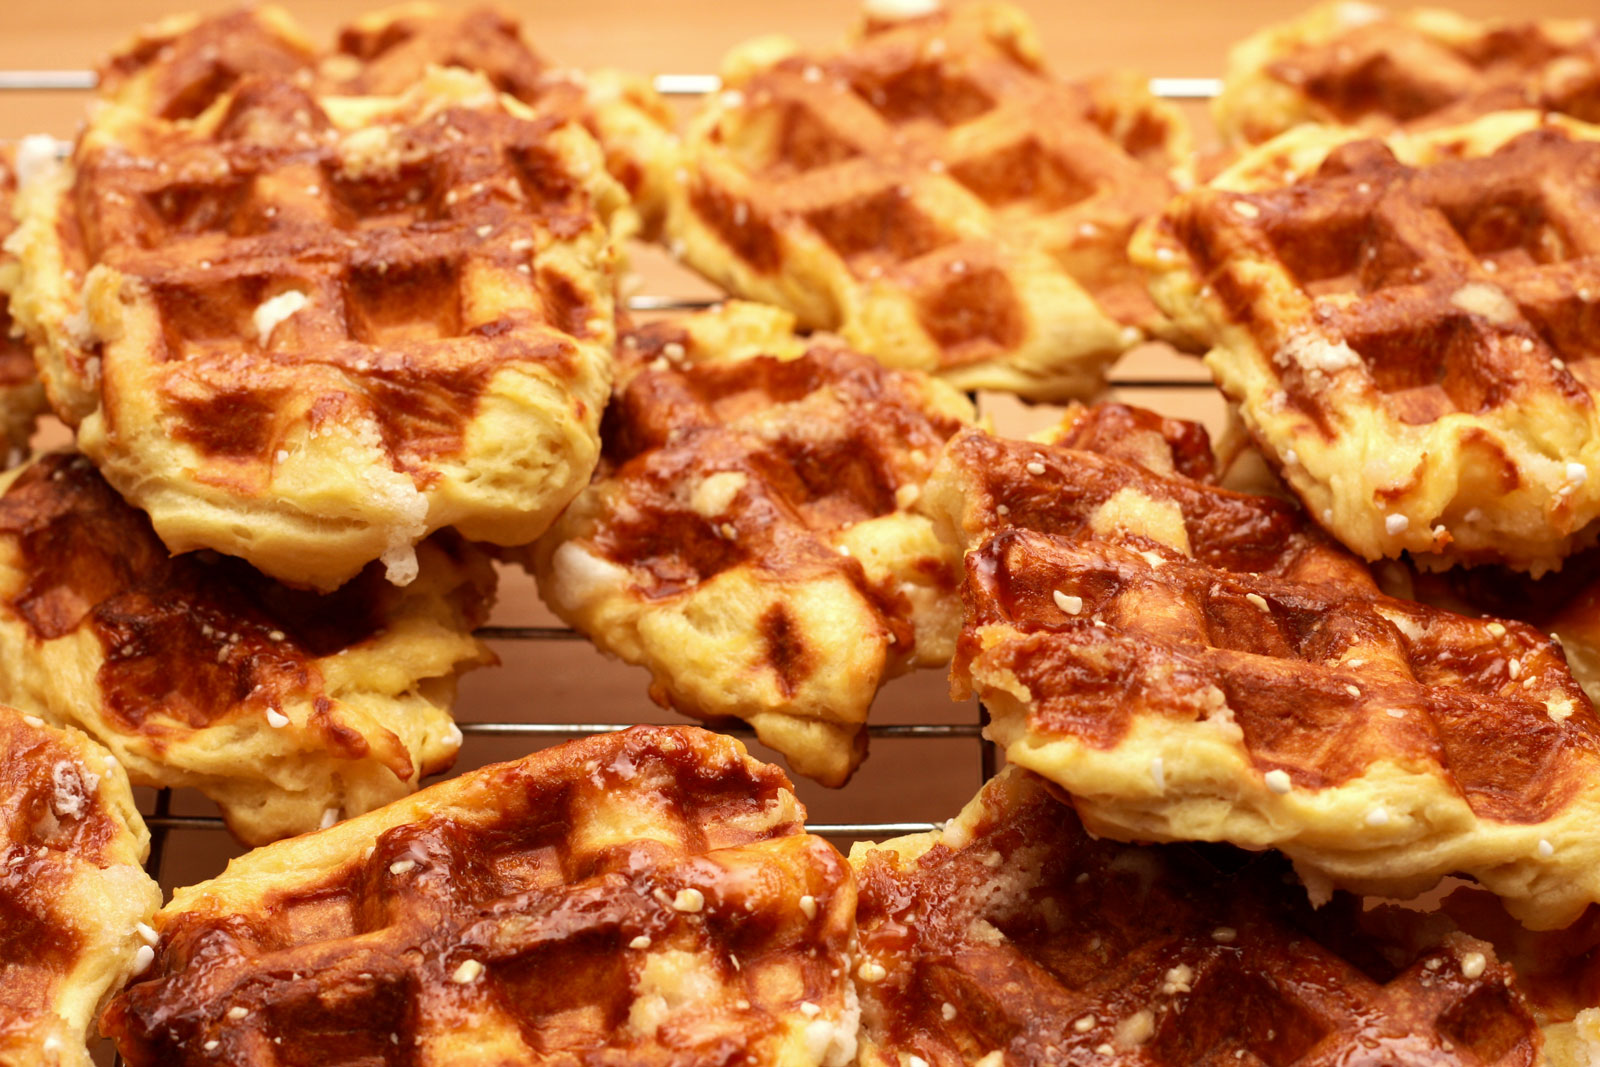 A tray of liege waffles